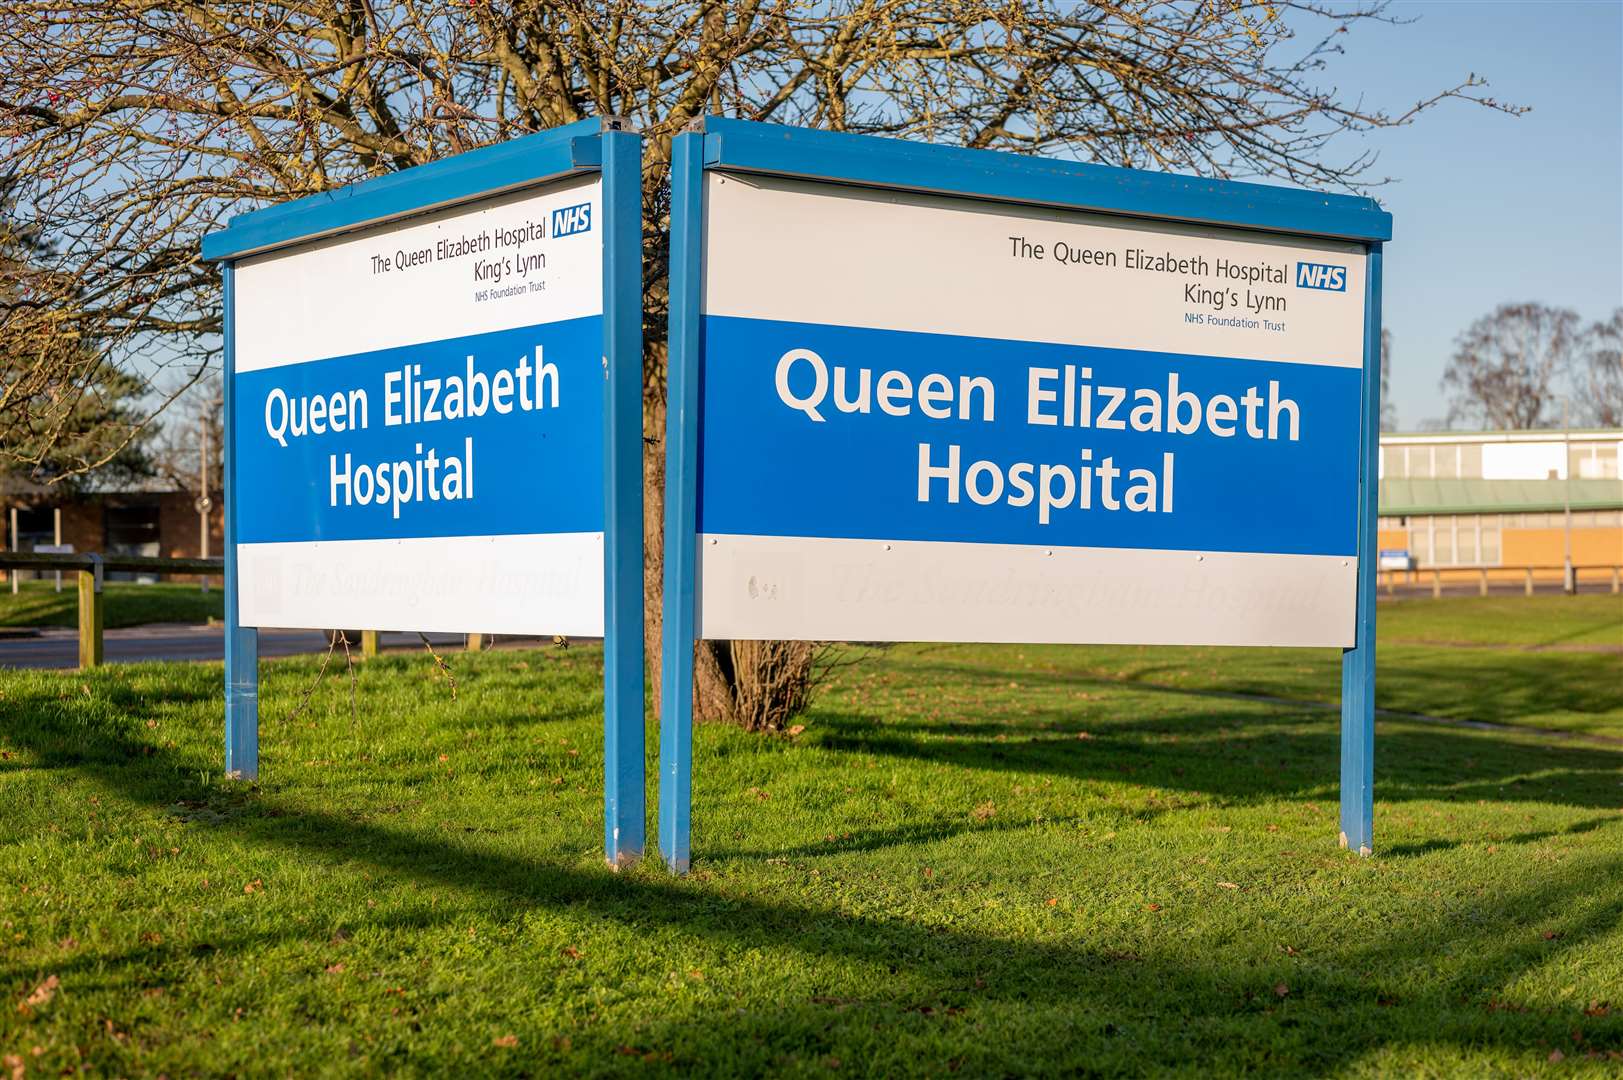 Patients at the Queen Elizabeth Hospital in Lynn could face cancellations amid strike action